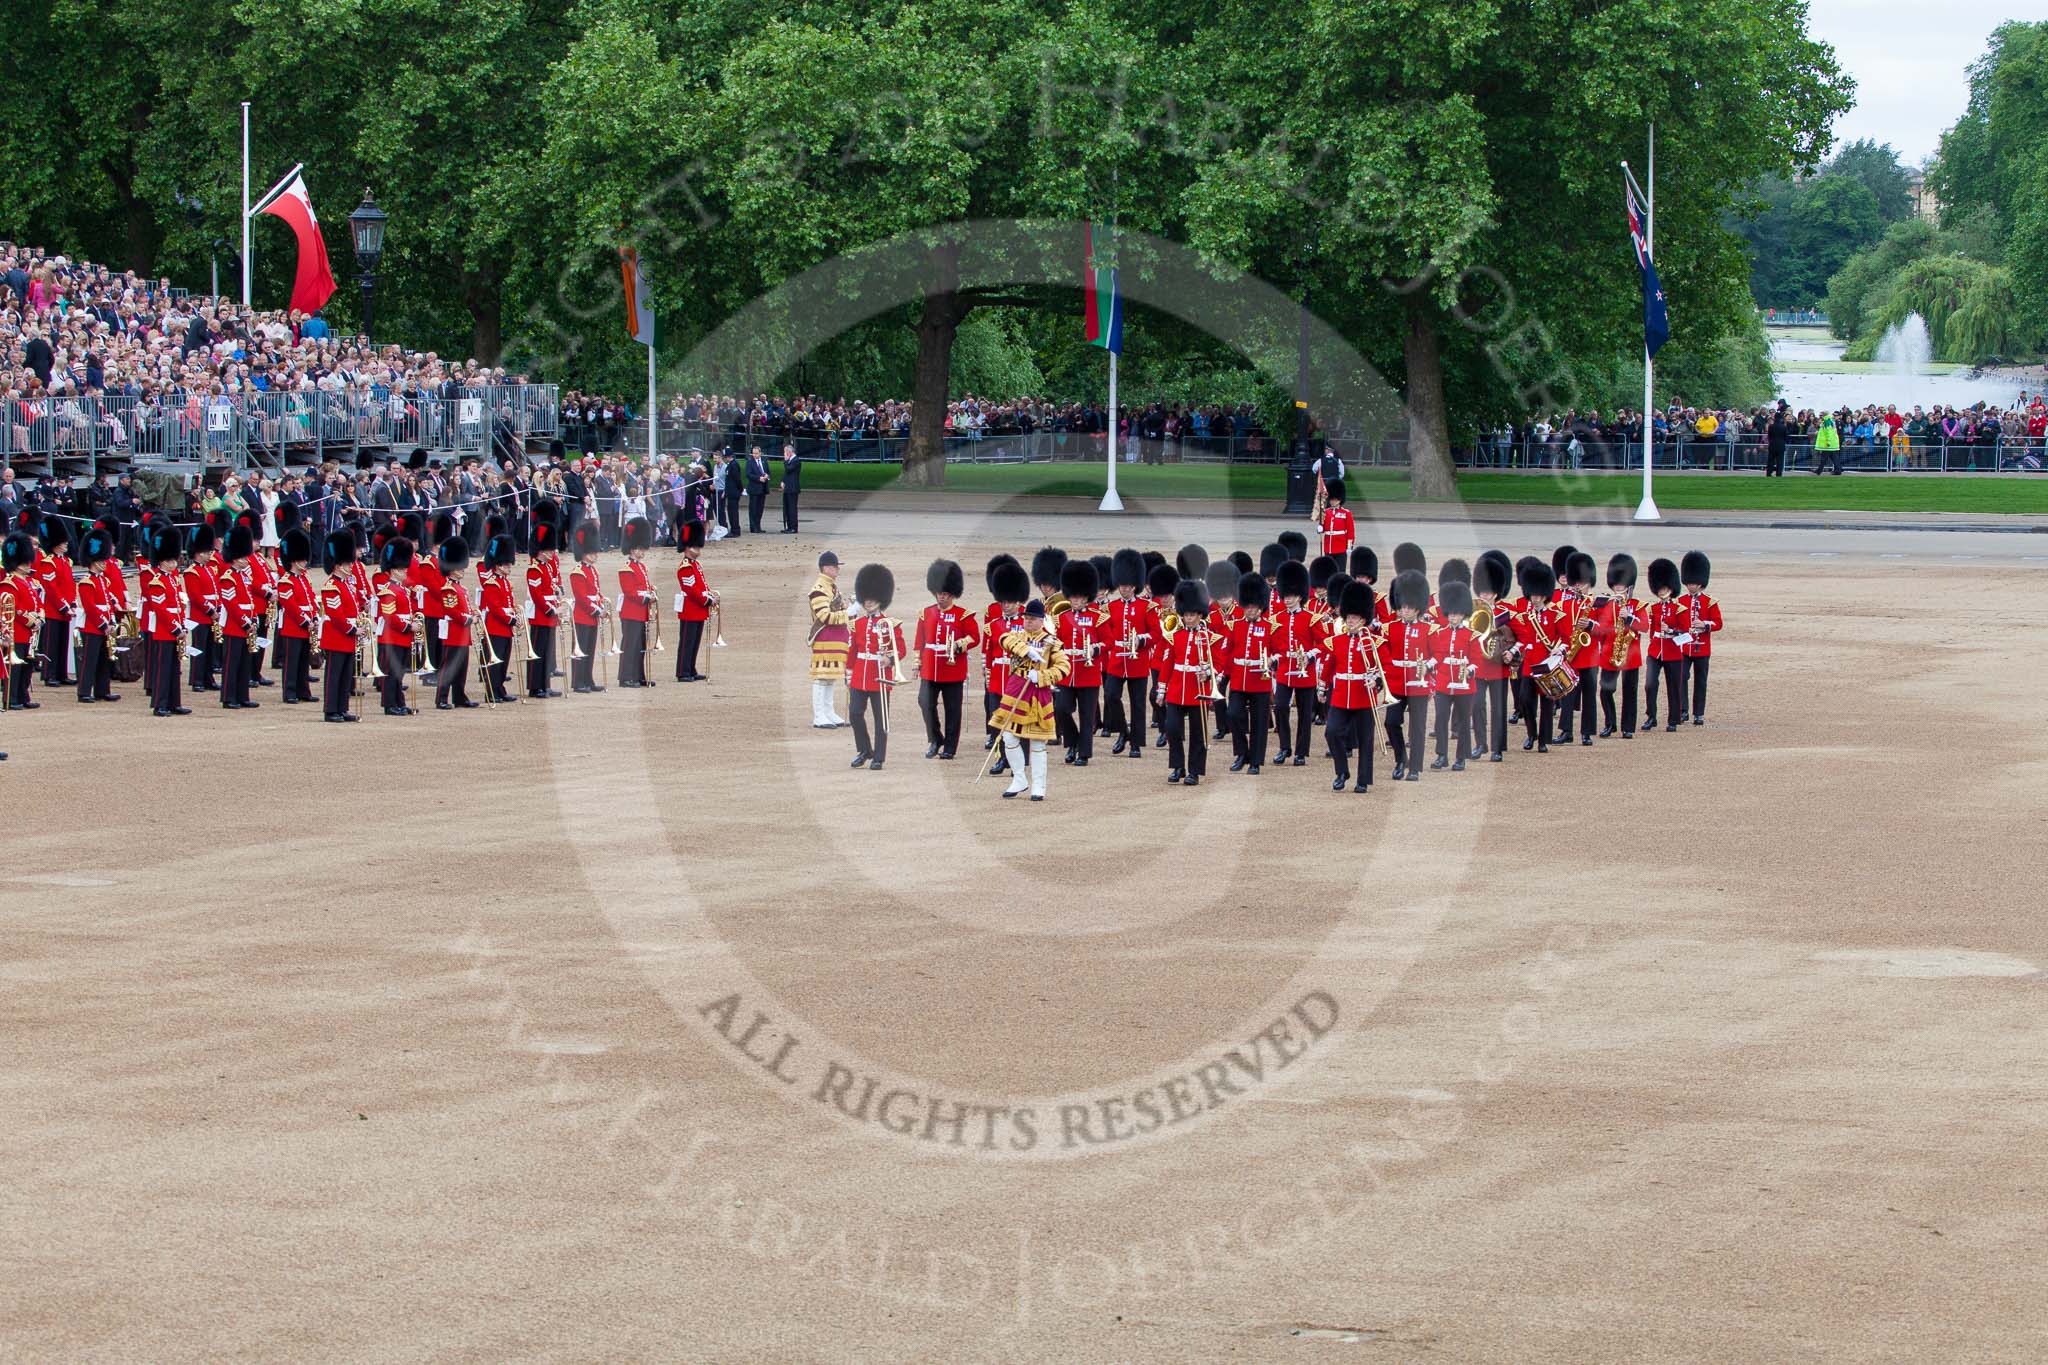 Trooping the Colour 2013: The Band of the Scots Guards arrives at Horse Guards Parade. Already present are the Band of the Coldstream Guards (red plumes) and the Band of the Irish Guards (blue plumes). Image #81, 15 June 2013 10:24 Horse Guards Parade, London, UK